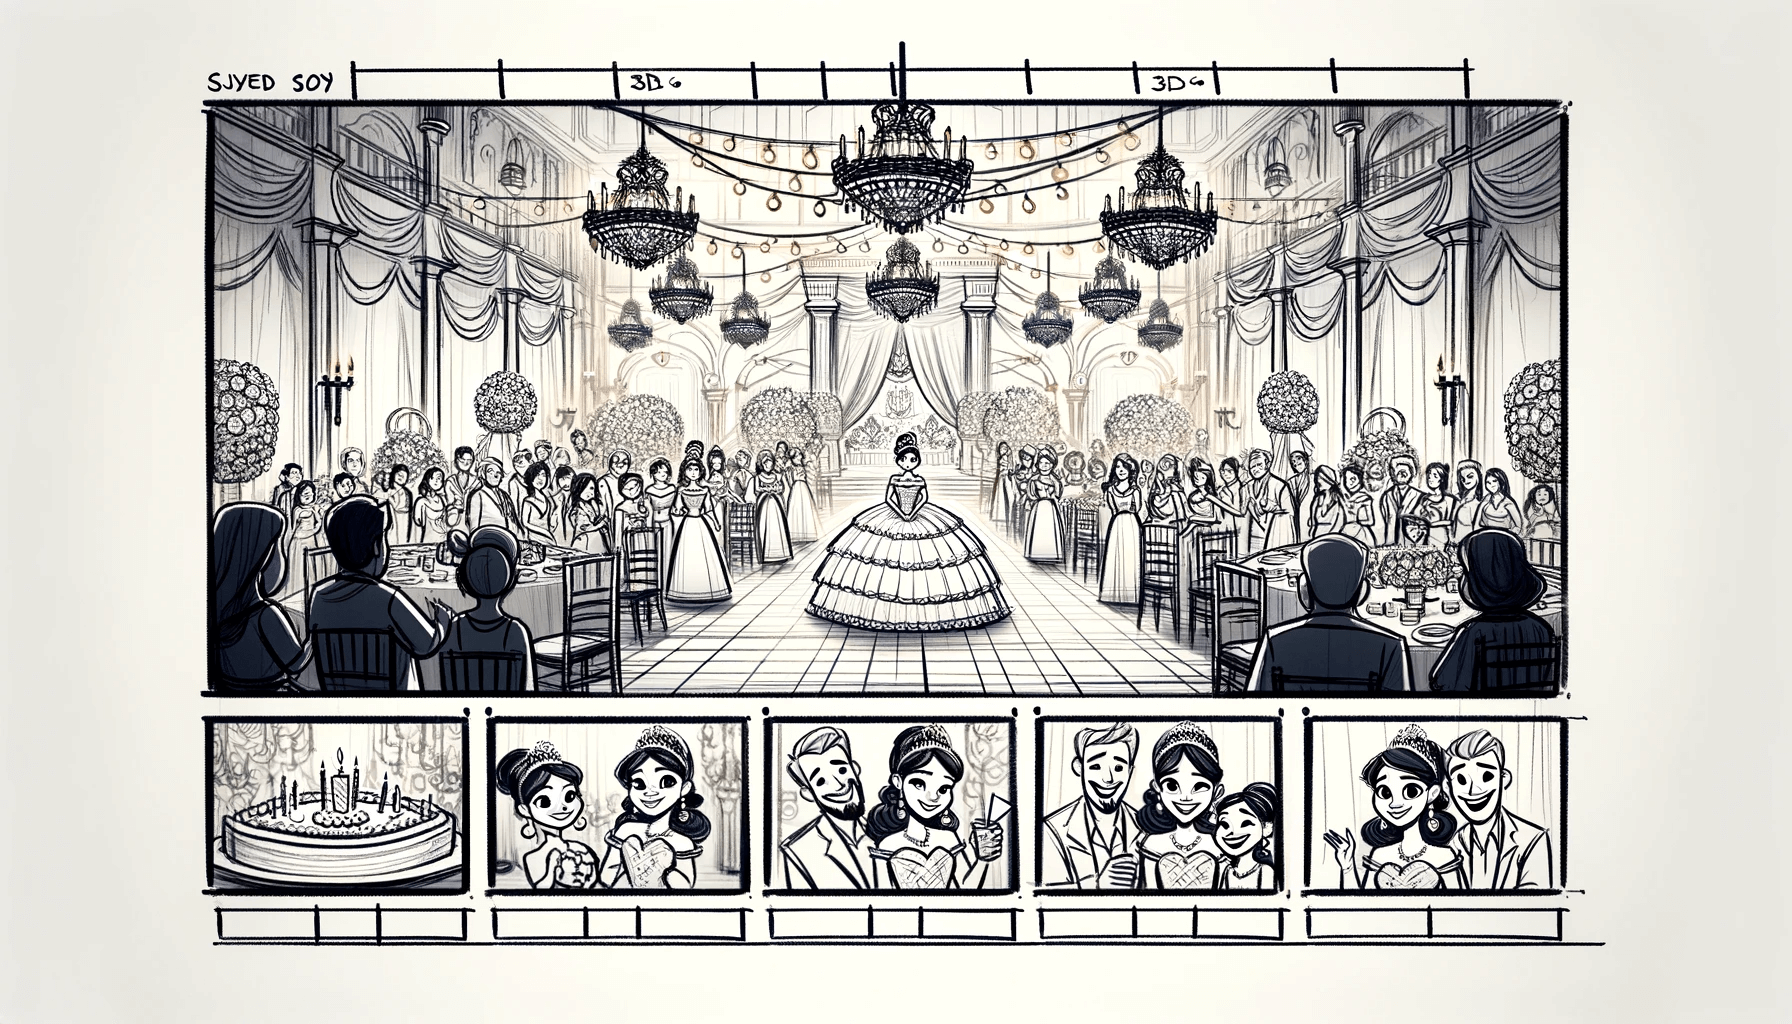 A drawing of a Quinceanera scene with a girl celebrating her coming-of-age event